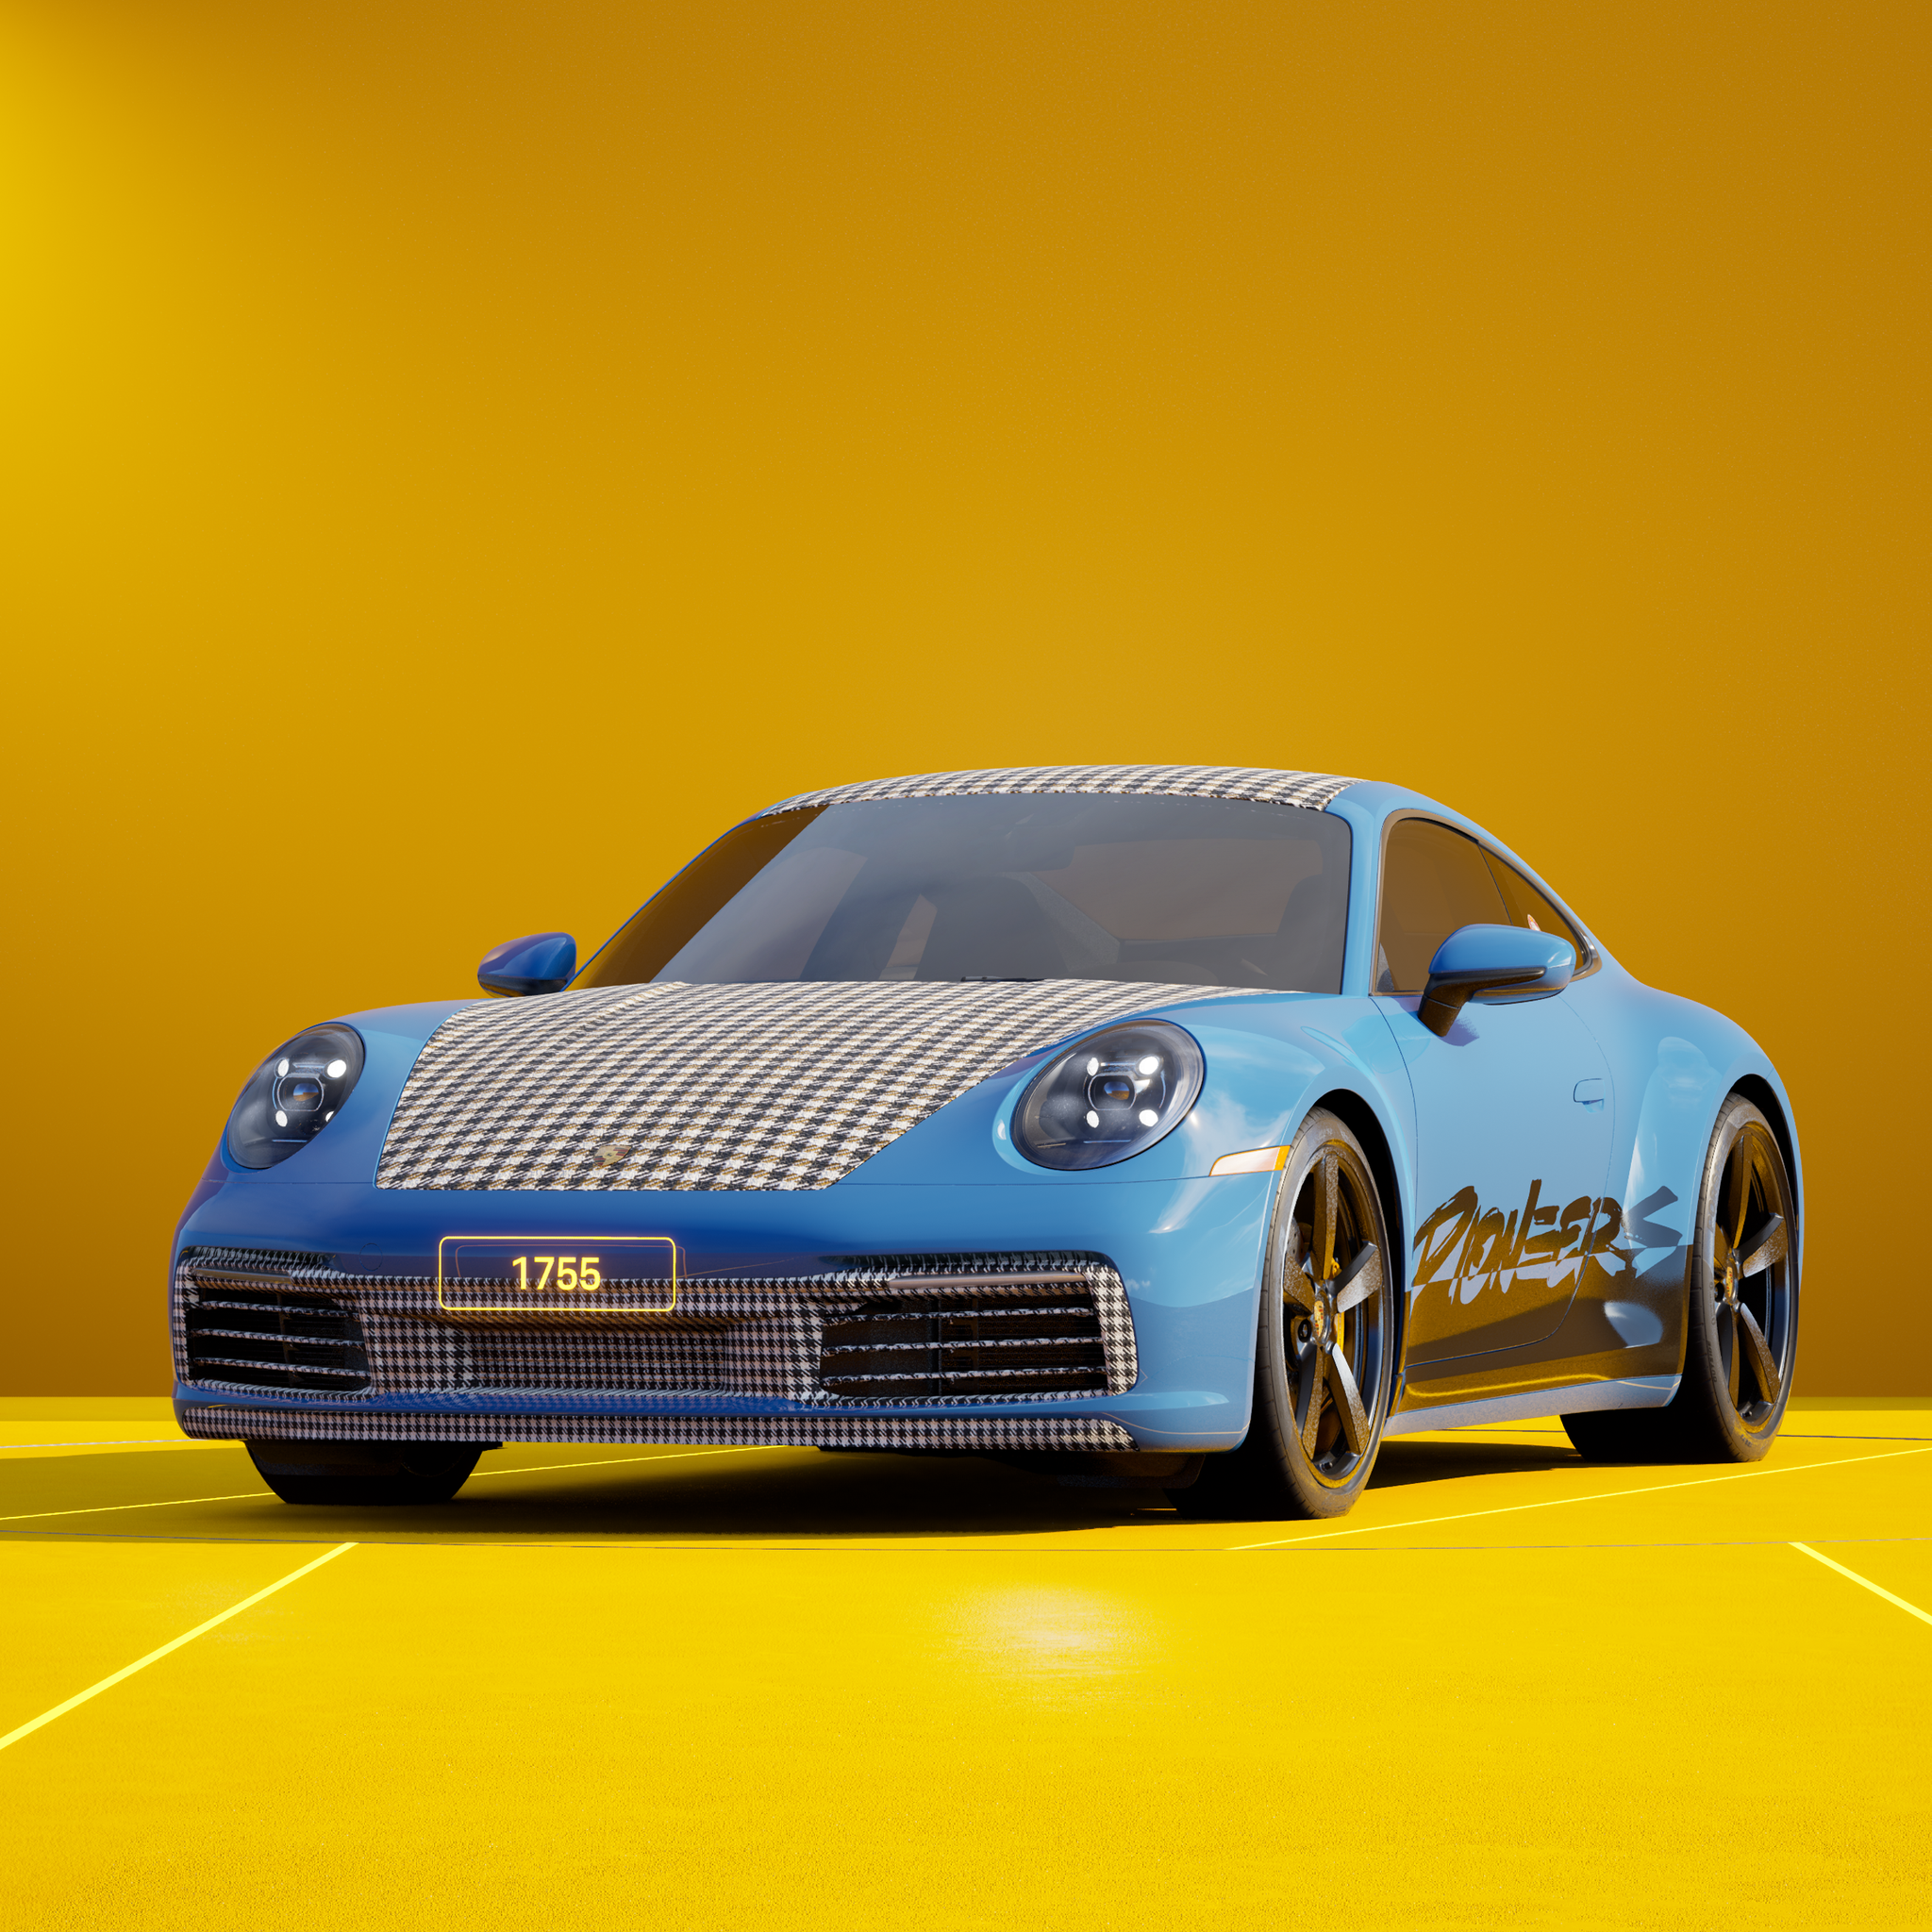 The PORSCHΞ 911 1755 image in phase